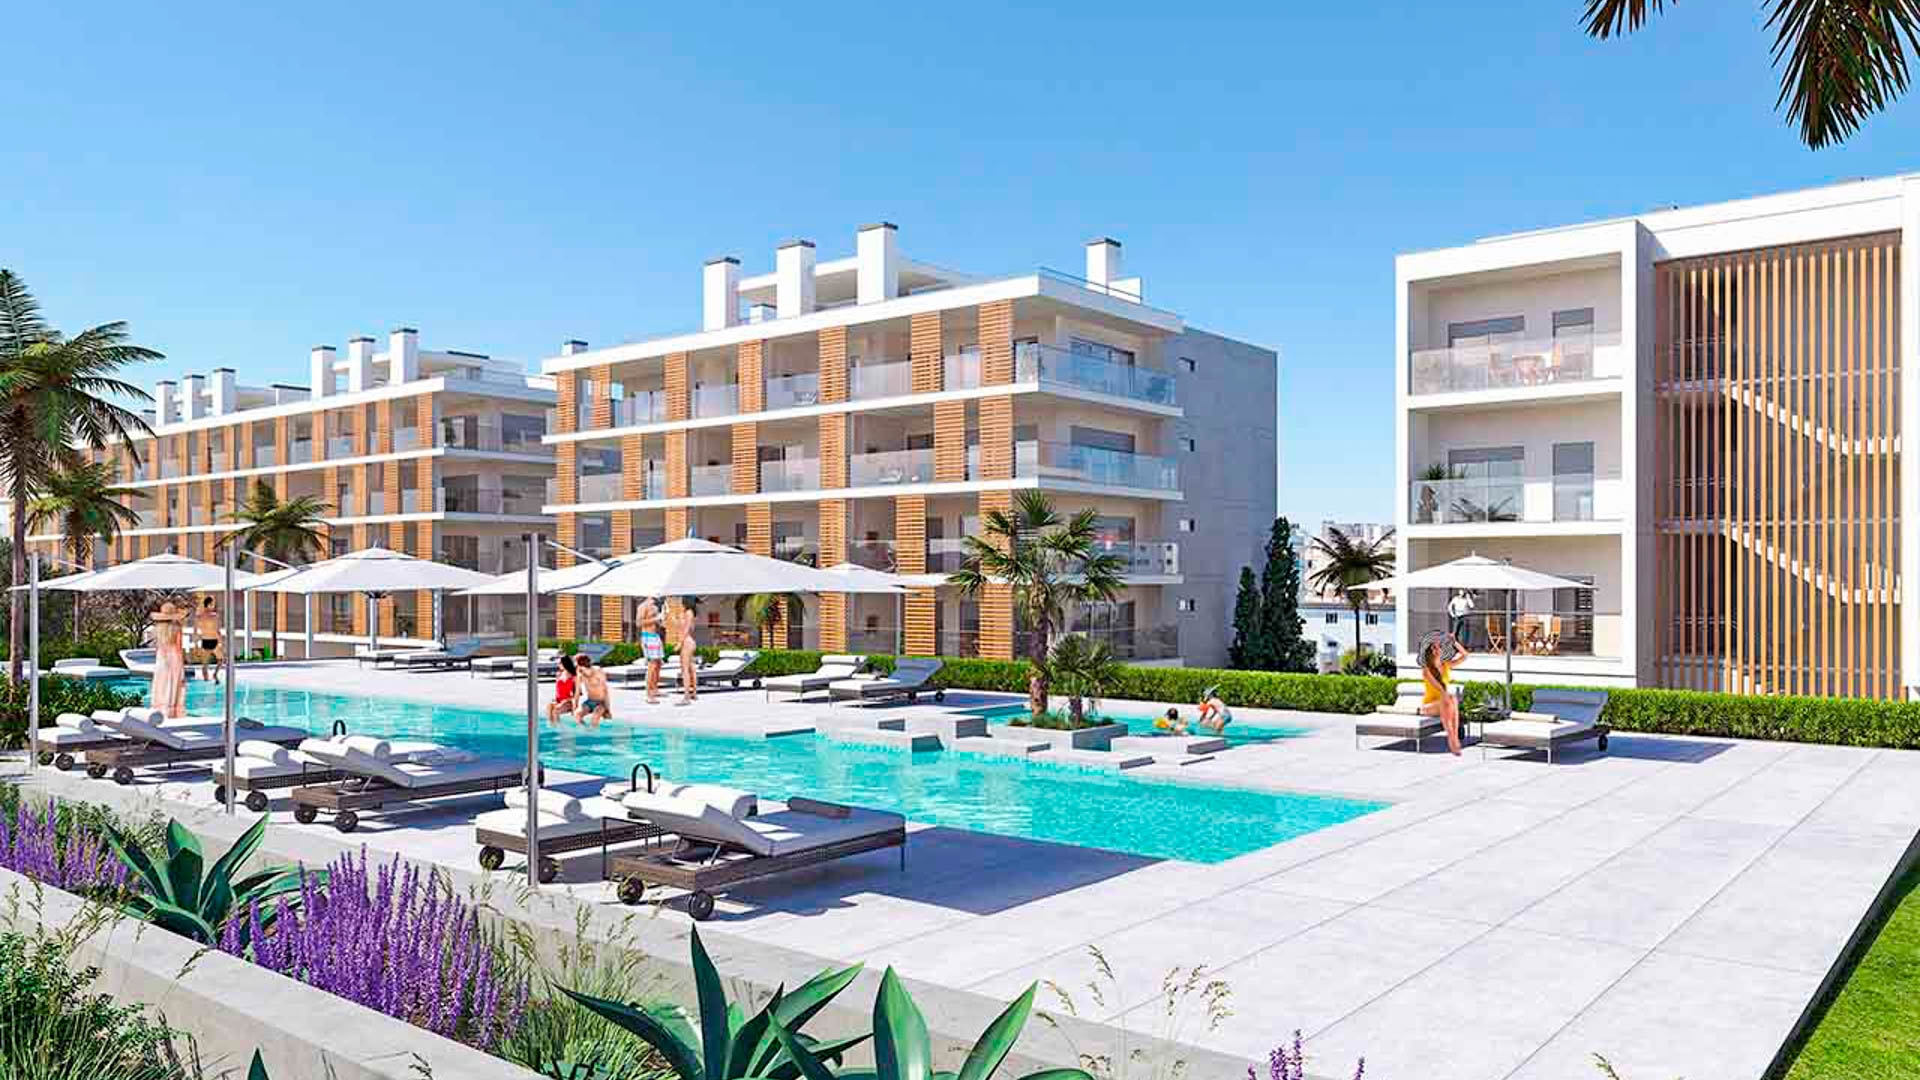 Off Plan – 3 Bedroom Penthouse Apartment, Albufeira | VM1969 Eco-friendly features to minimize environmental impact, these new apartments are perfect for an investment opportunity or holiday home